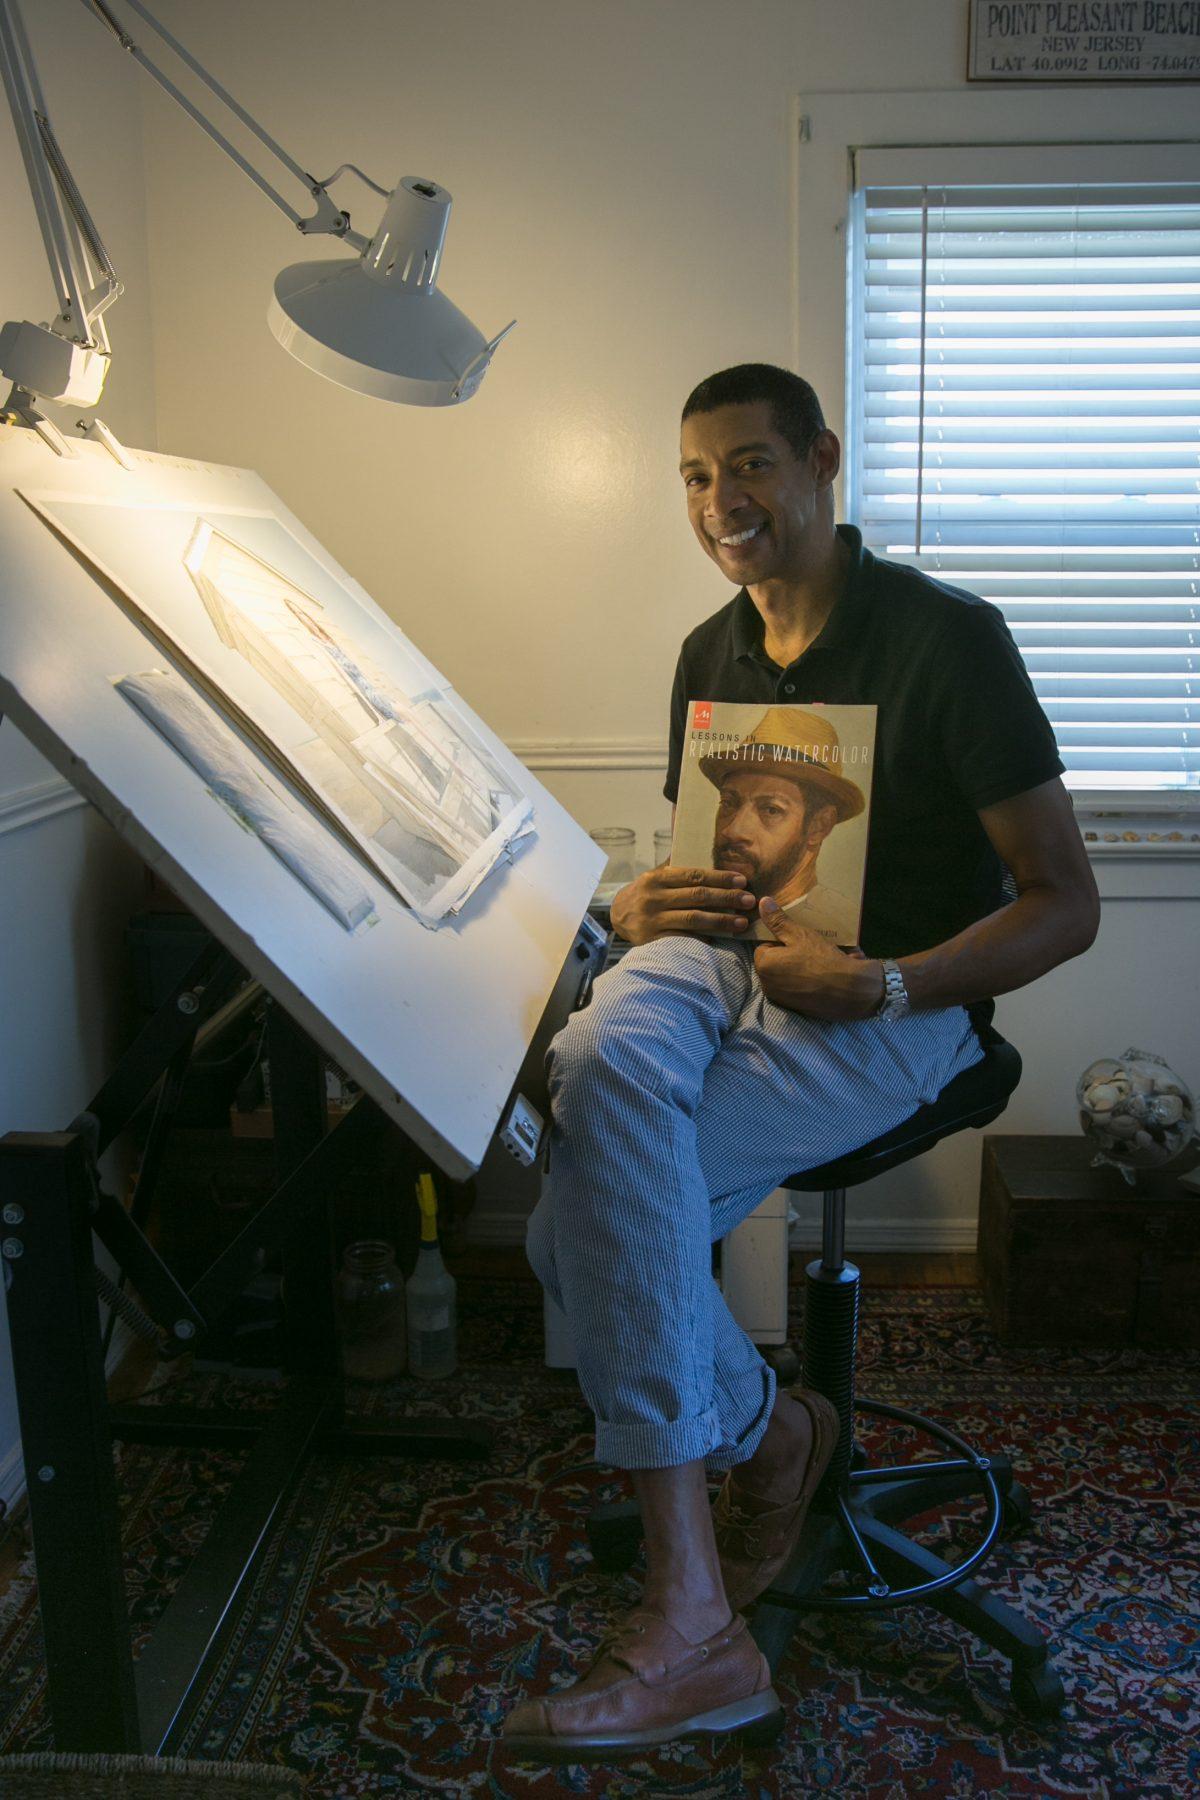 Mario A. Robinson shows his paintings, drawings, and book in his studio at home in Point Pleasant, New Jersey, on Sept. 4, 2018. (Milene Fernandez/The Epoch Times)